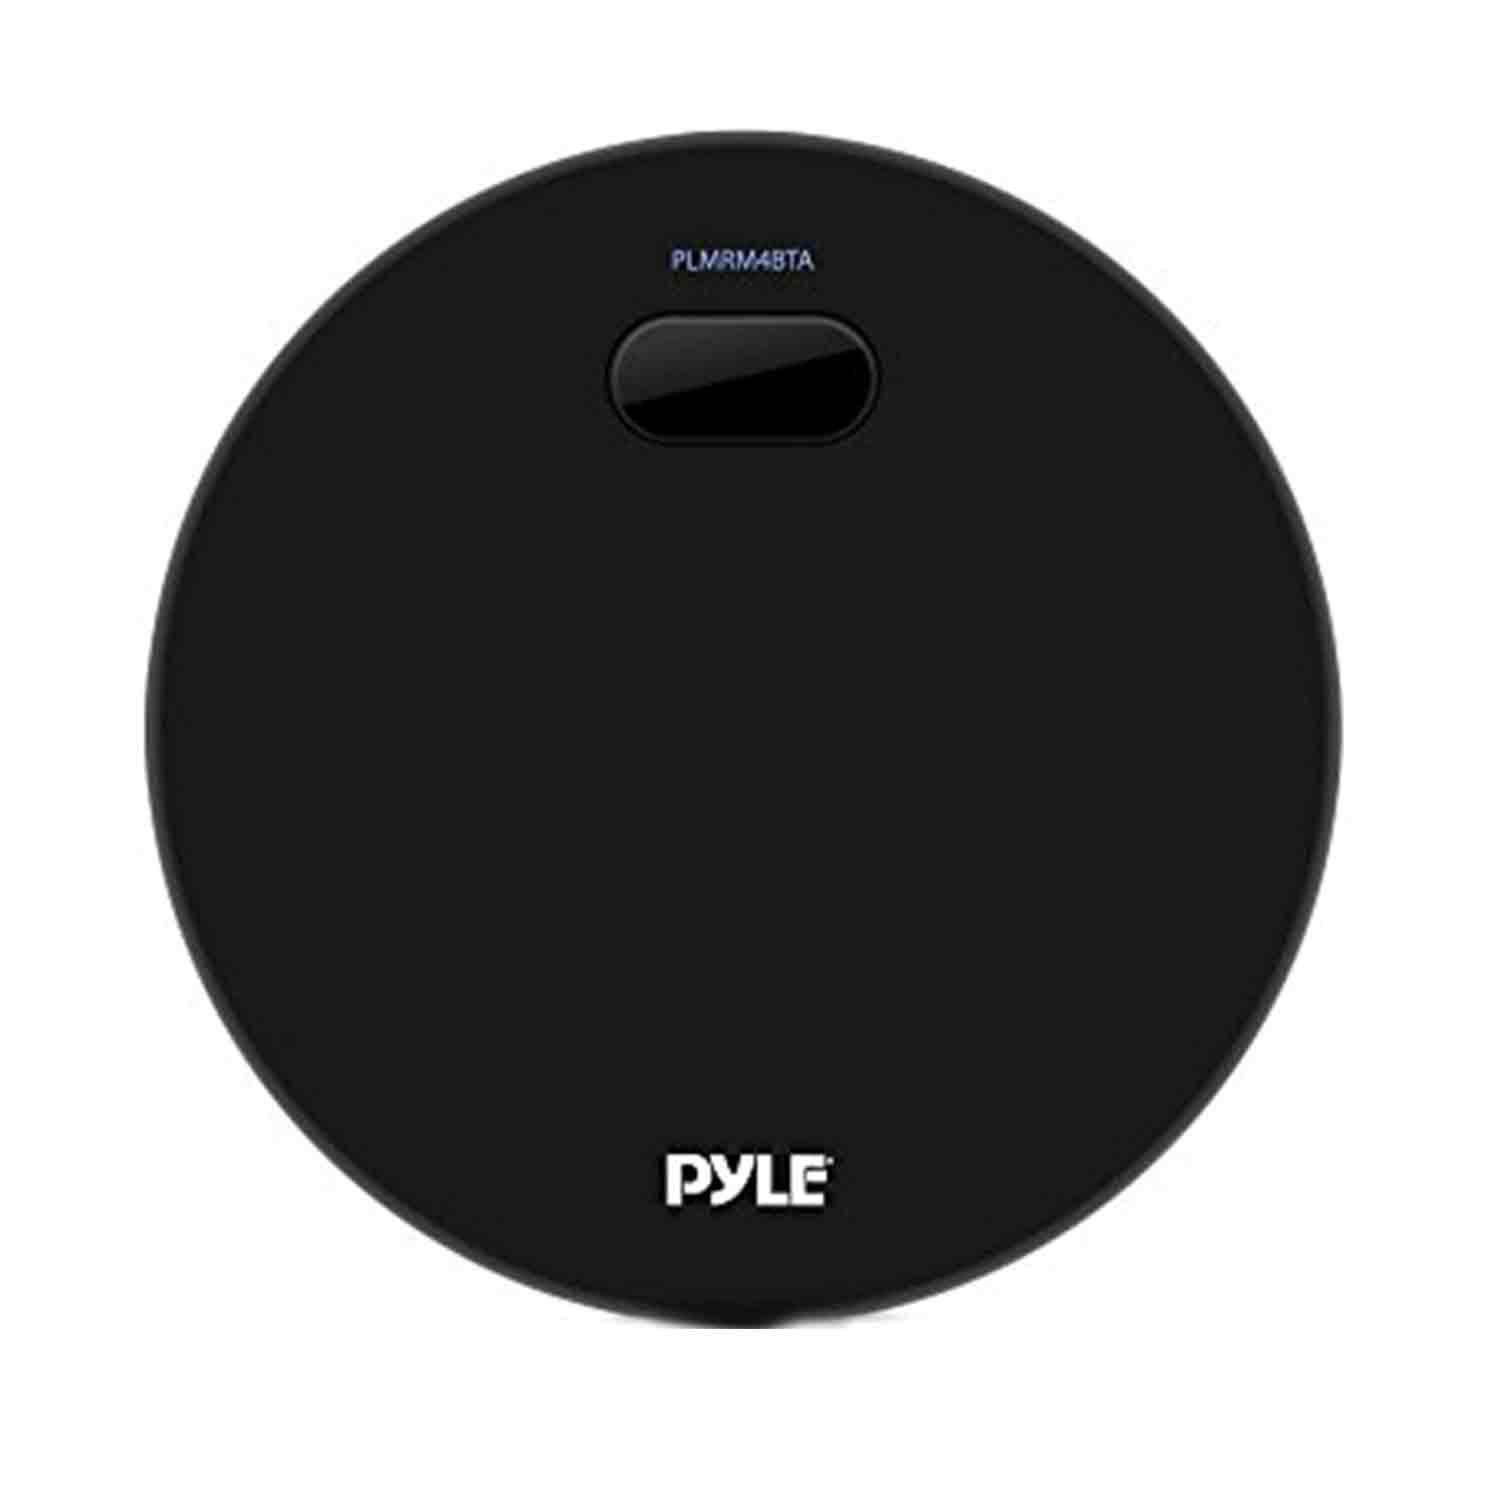 Pyle Marine Bluetooth Water Resistant Amplifier Receiver with Pyle 2 Way Marine Speakers (3-Pairs), Pyle Waterproof Marine Amplifier, Enrock Marine Antenna and Enrock Audio 50' 16G Speaker Wire - image 2 of 6